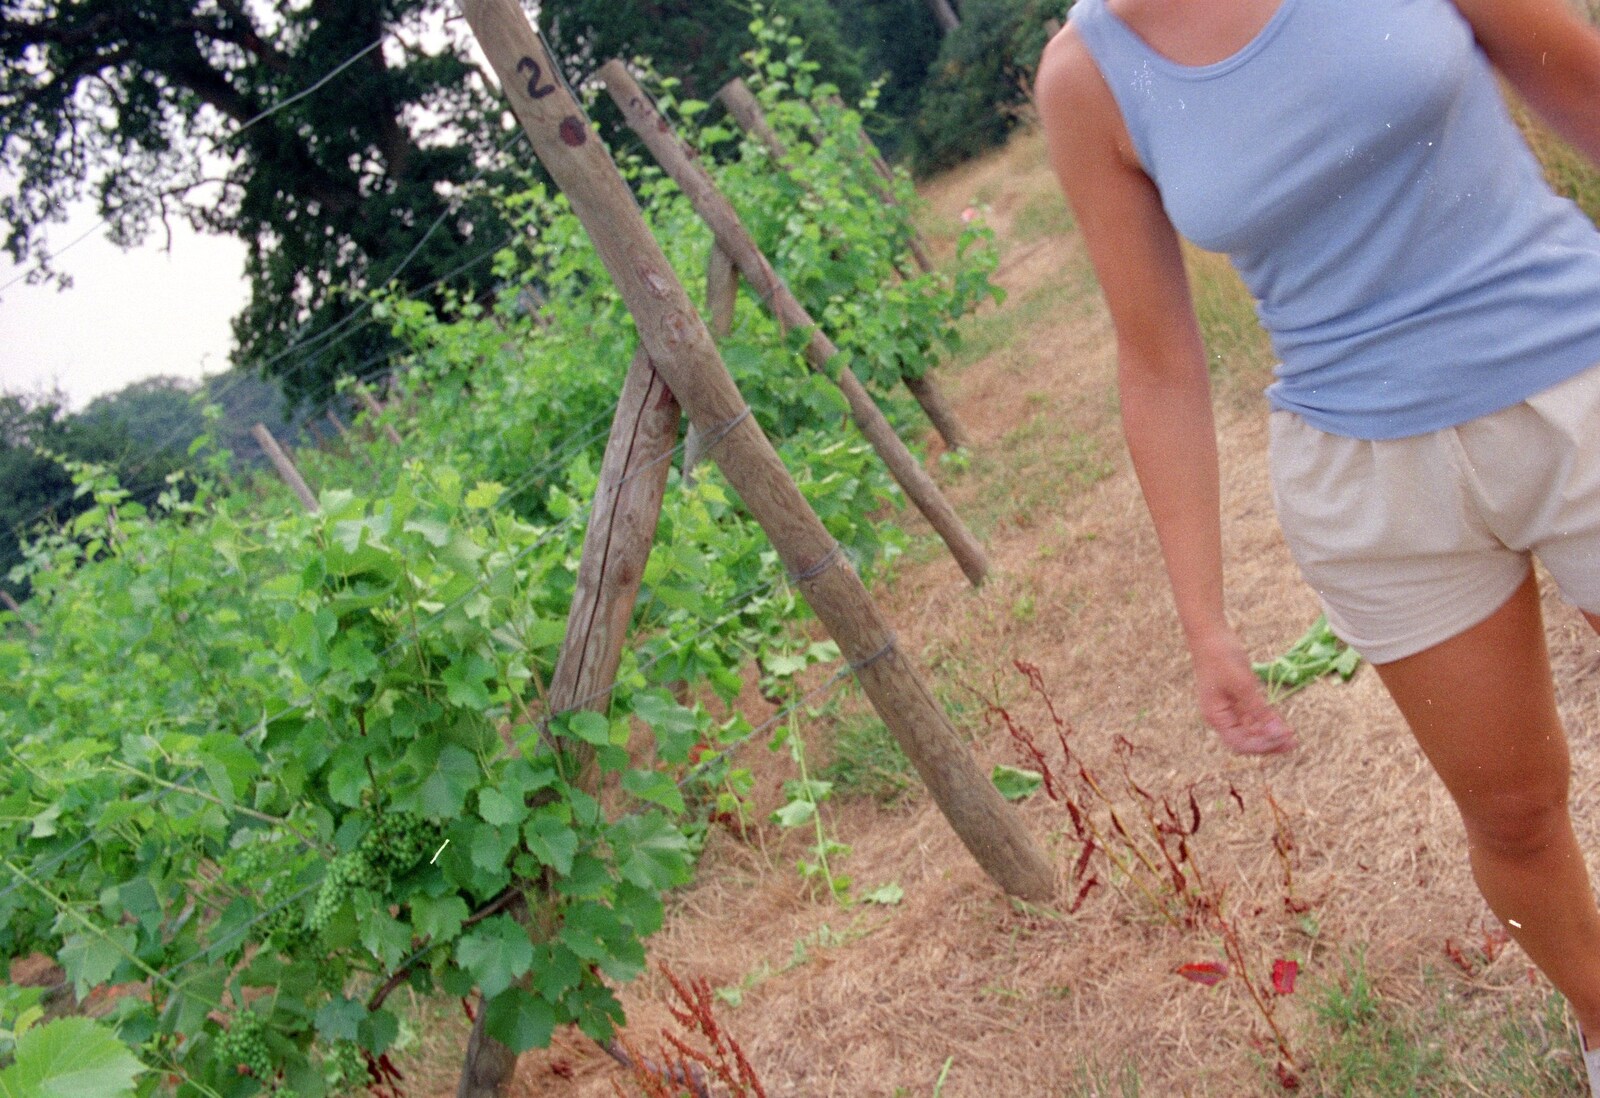 An accidental shot of Angela and some vines from Back From Uni: Summer Pruning, Bransgore, Dorset - 25th July 1989